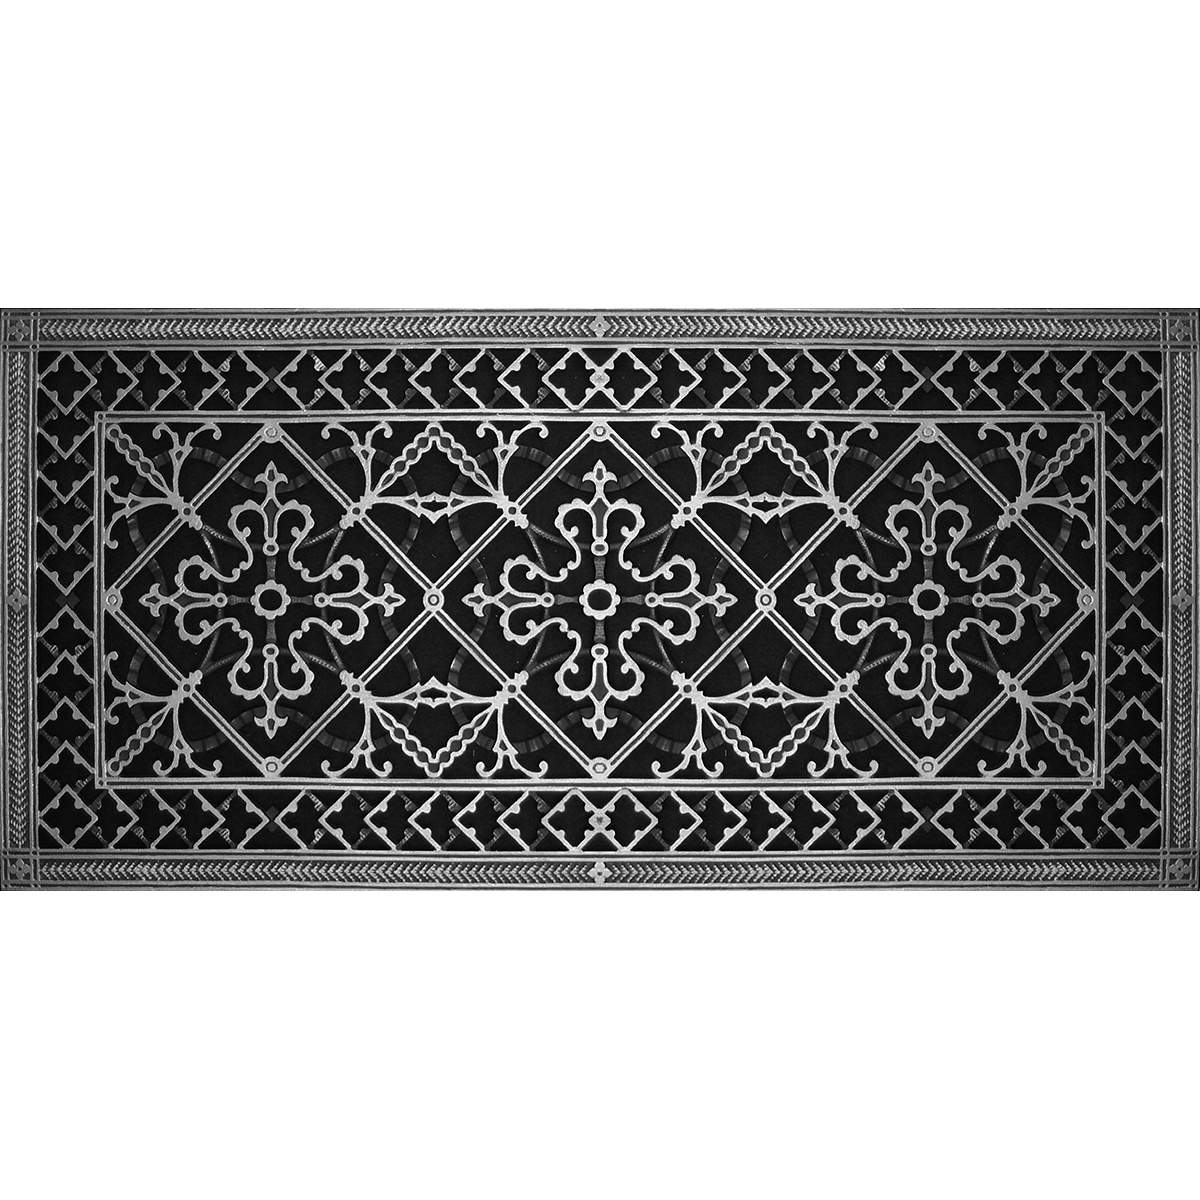 Decorative Vent Cover 14x24, Arts and Crafts Style